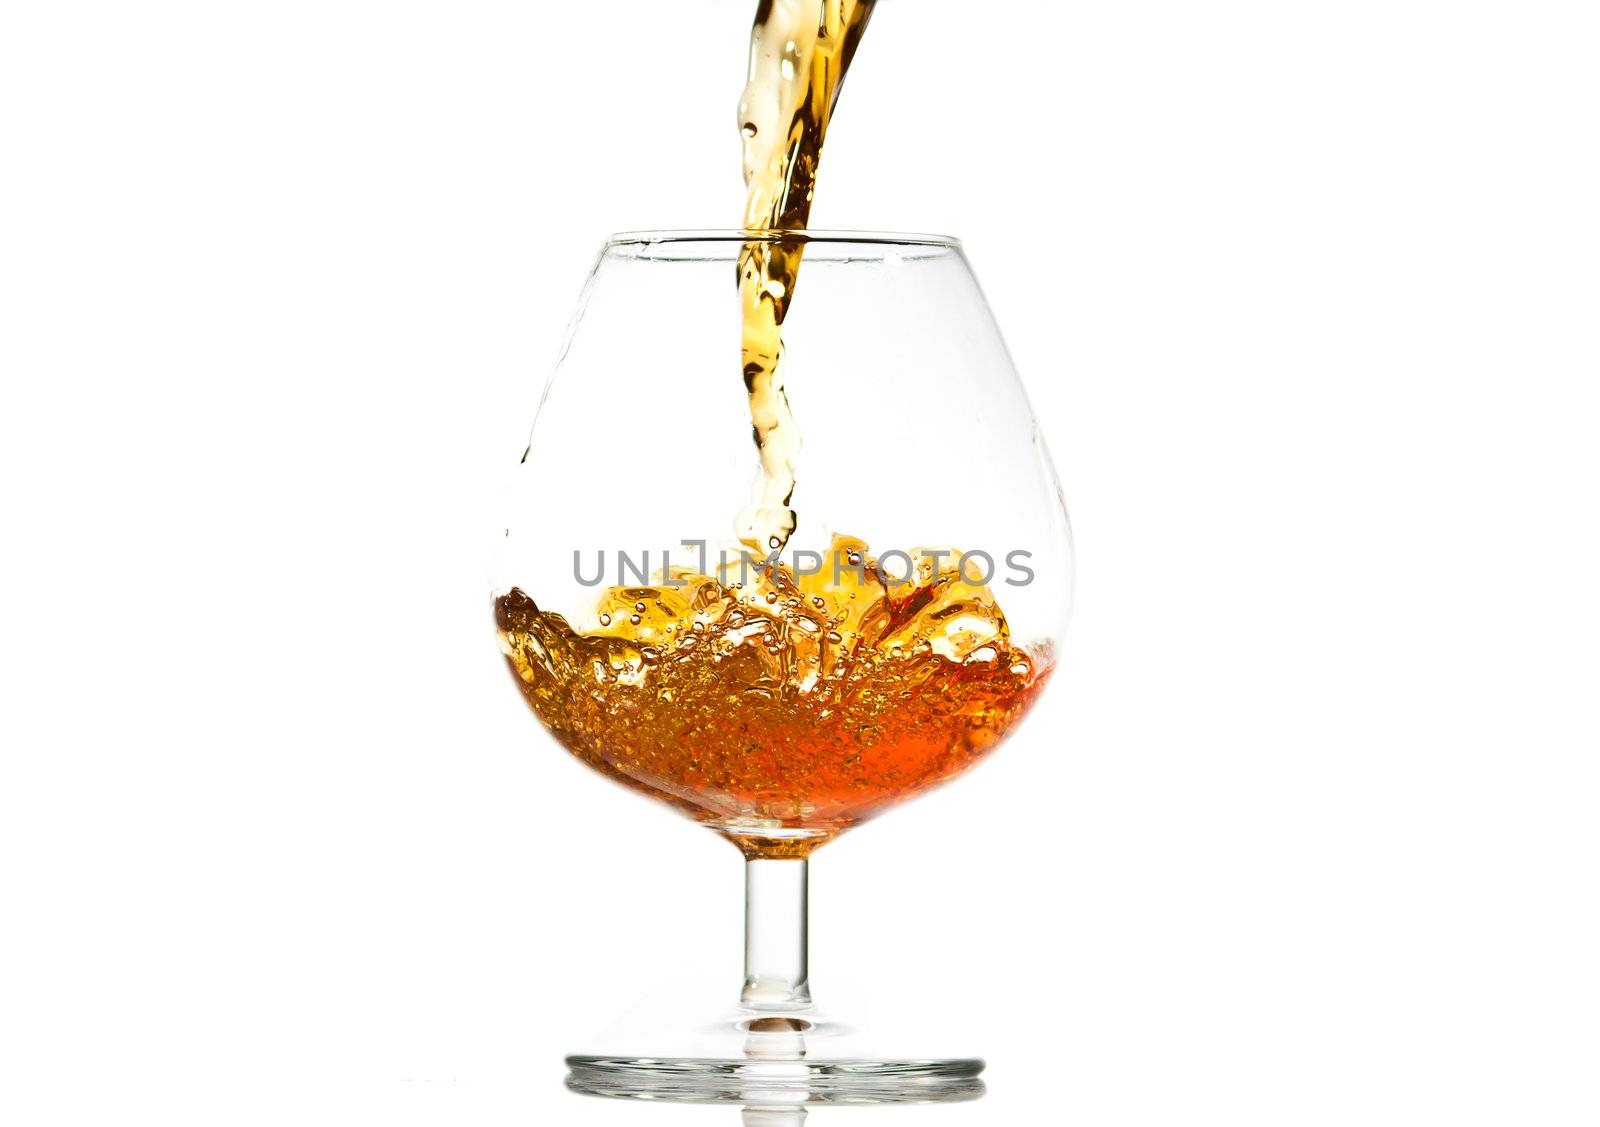 filling a glass of brandy, close-up